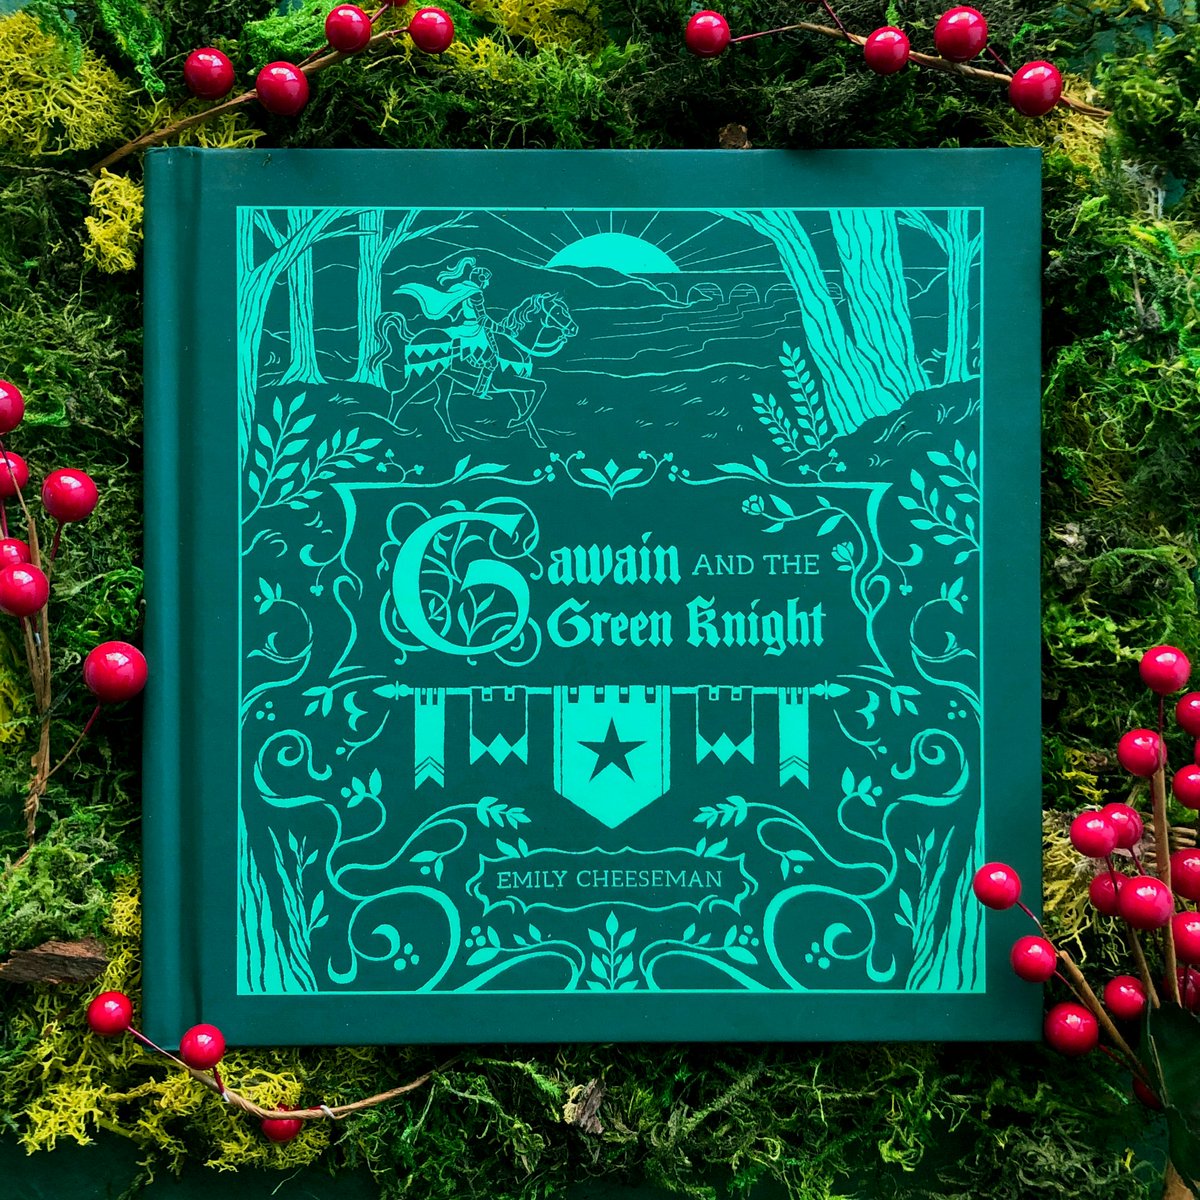 I'm pleased to announce that a reprint of Gawain and the Green Knight is officially in the works, and the book will be available on December 1st! 🌿